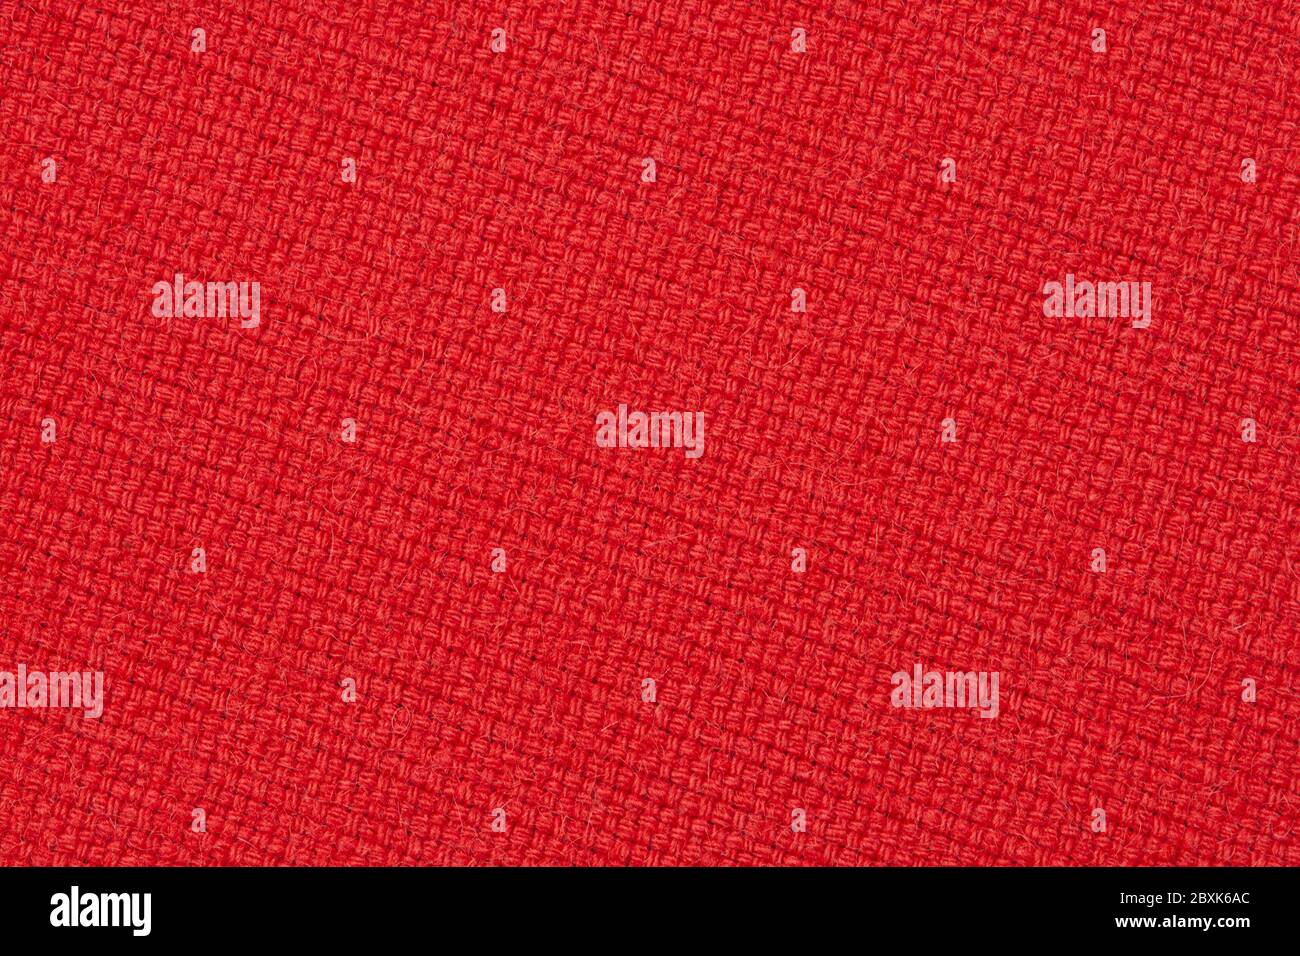 red wool fabric texture, diagonally arranged upholstery cloth background Stock Photo